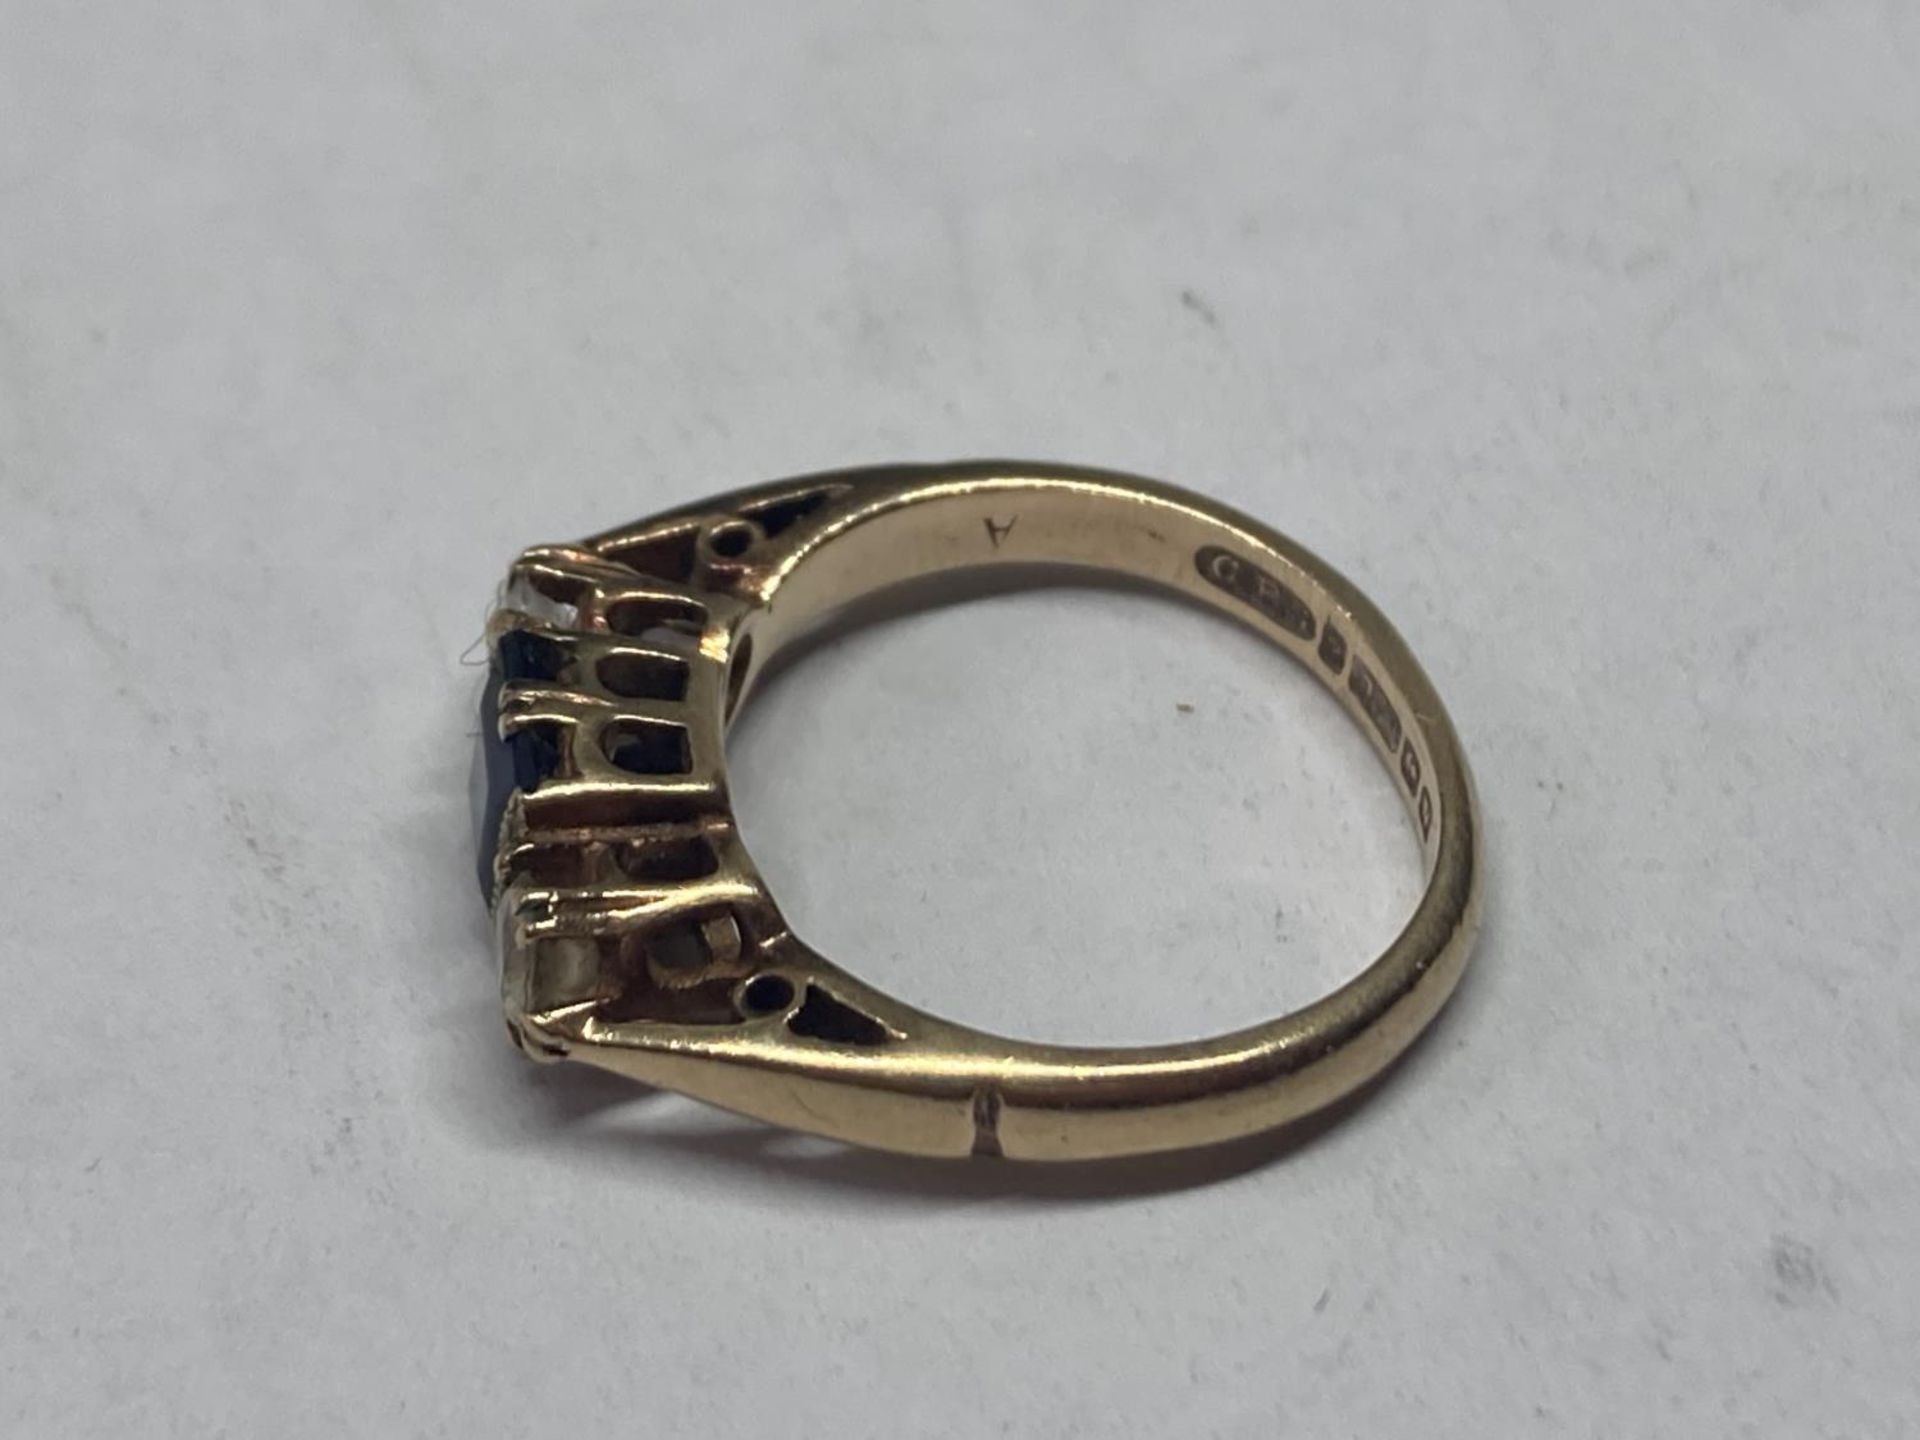 A 9 CARAT GOLD RING WITH CENTRE SAPPHIRE AND CUBIC ZIRCONIAS - Image 2 of 3